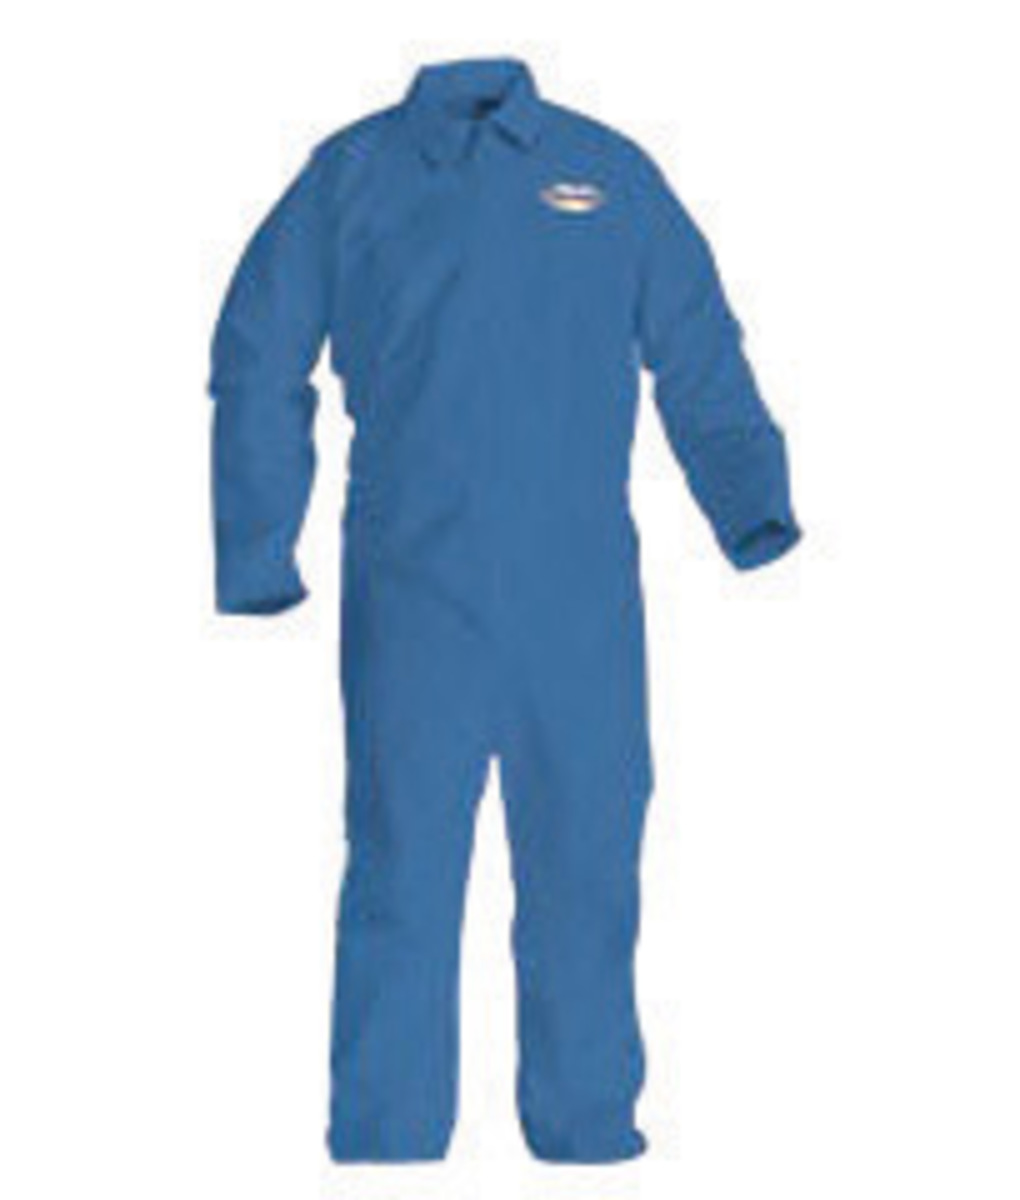 Kimberly-Clark Professional* Large Blue KleenGuard* A60 Film Laminate Coveralls With Storm Flap Over Front Zipper (Availability